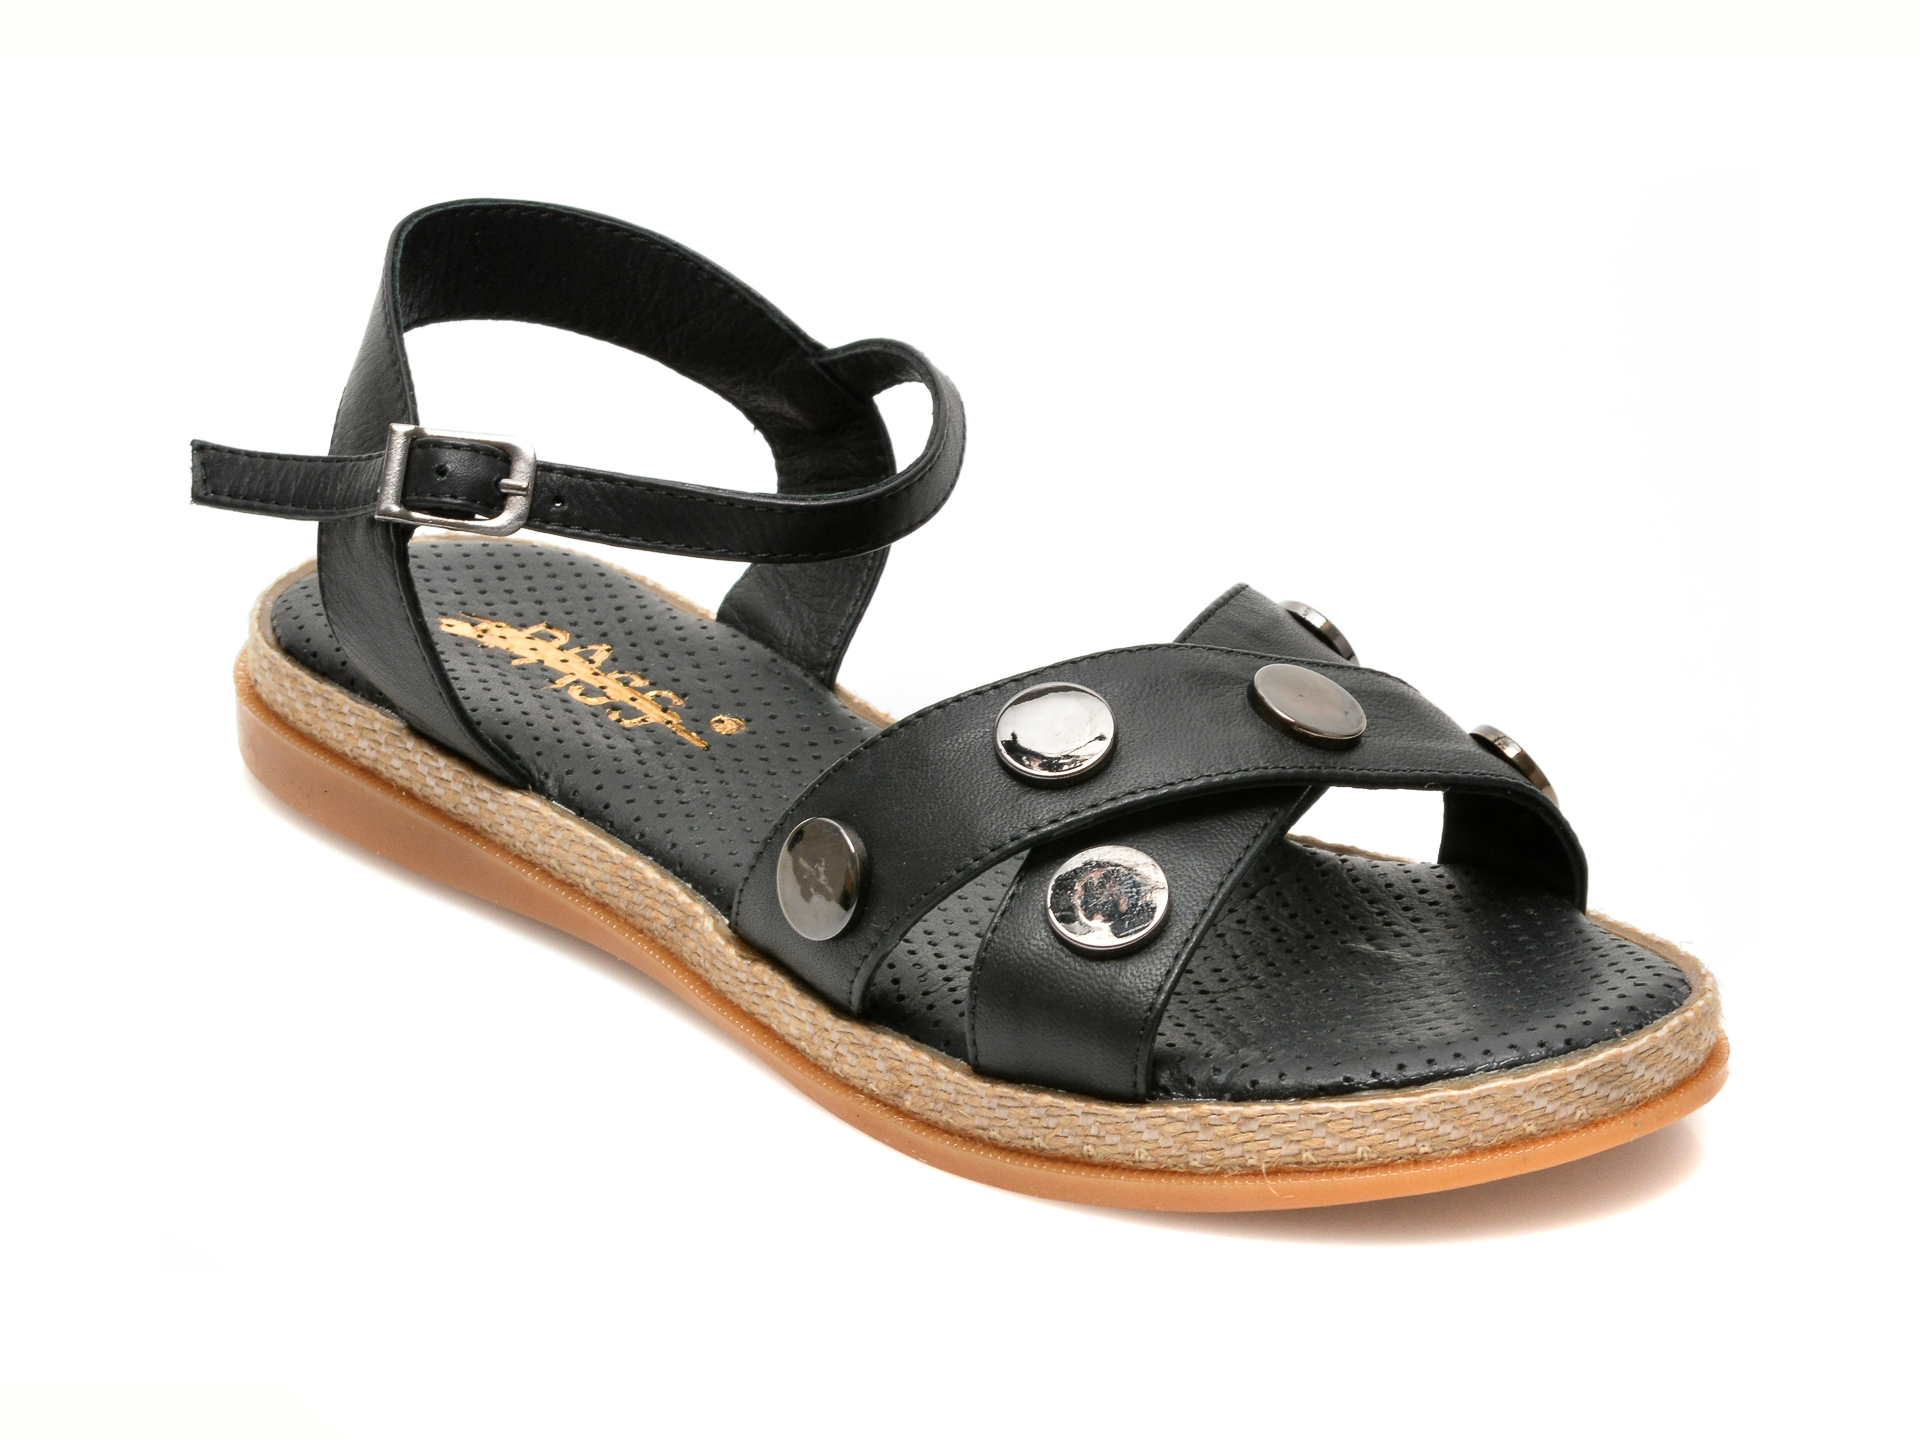 Sandale PASS COLLECTION negre, 1006, din piele naturala otter.ro